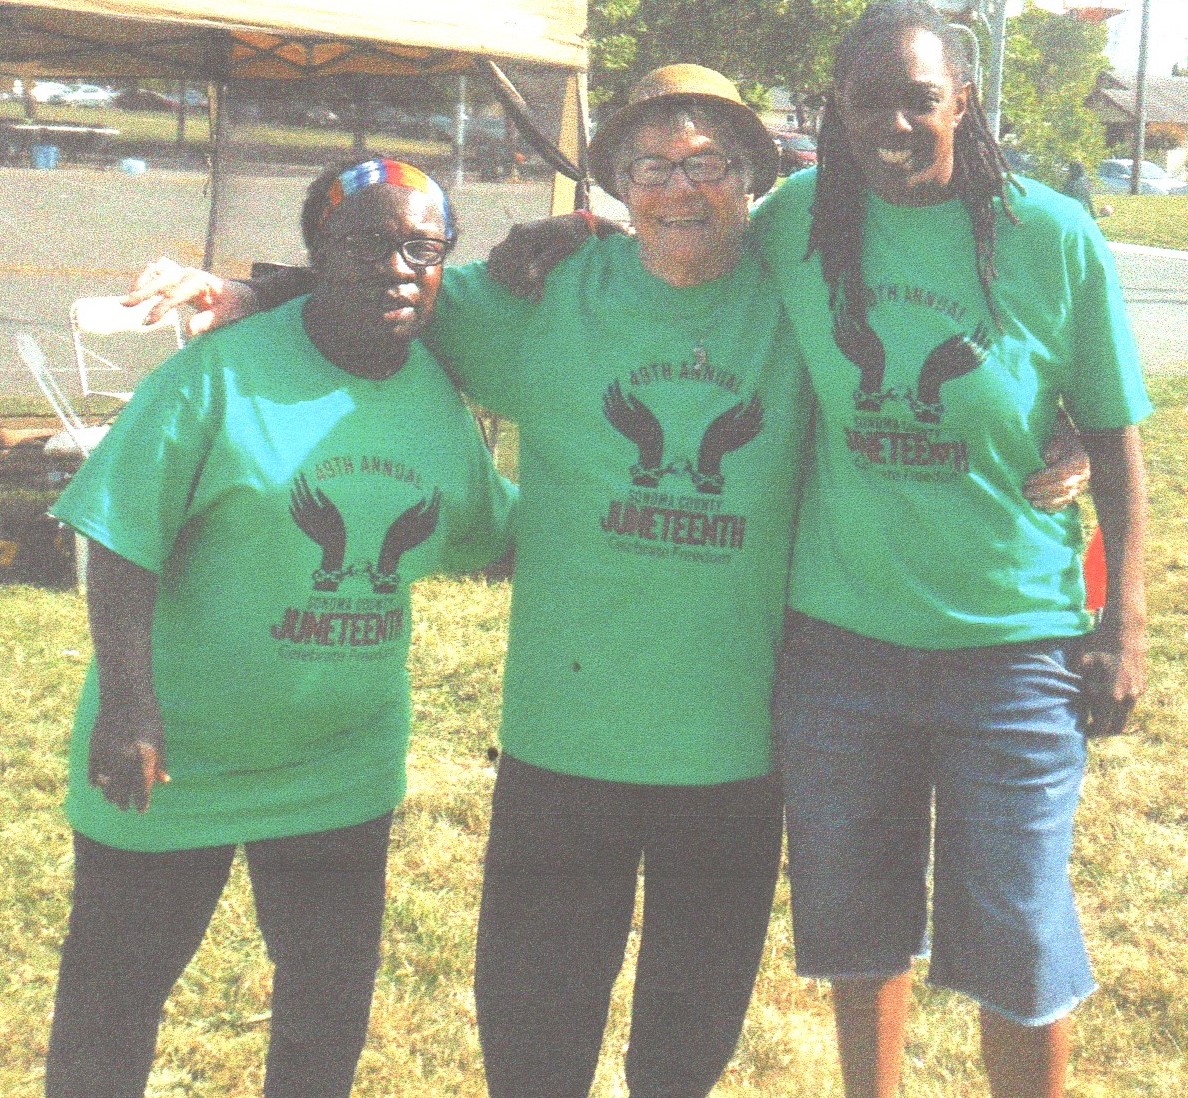 Nancy Rogers, Elaine Holtz, and Tina Rogers at the 49th Annual Juneteenth